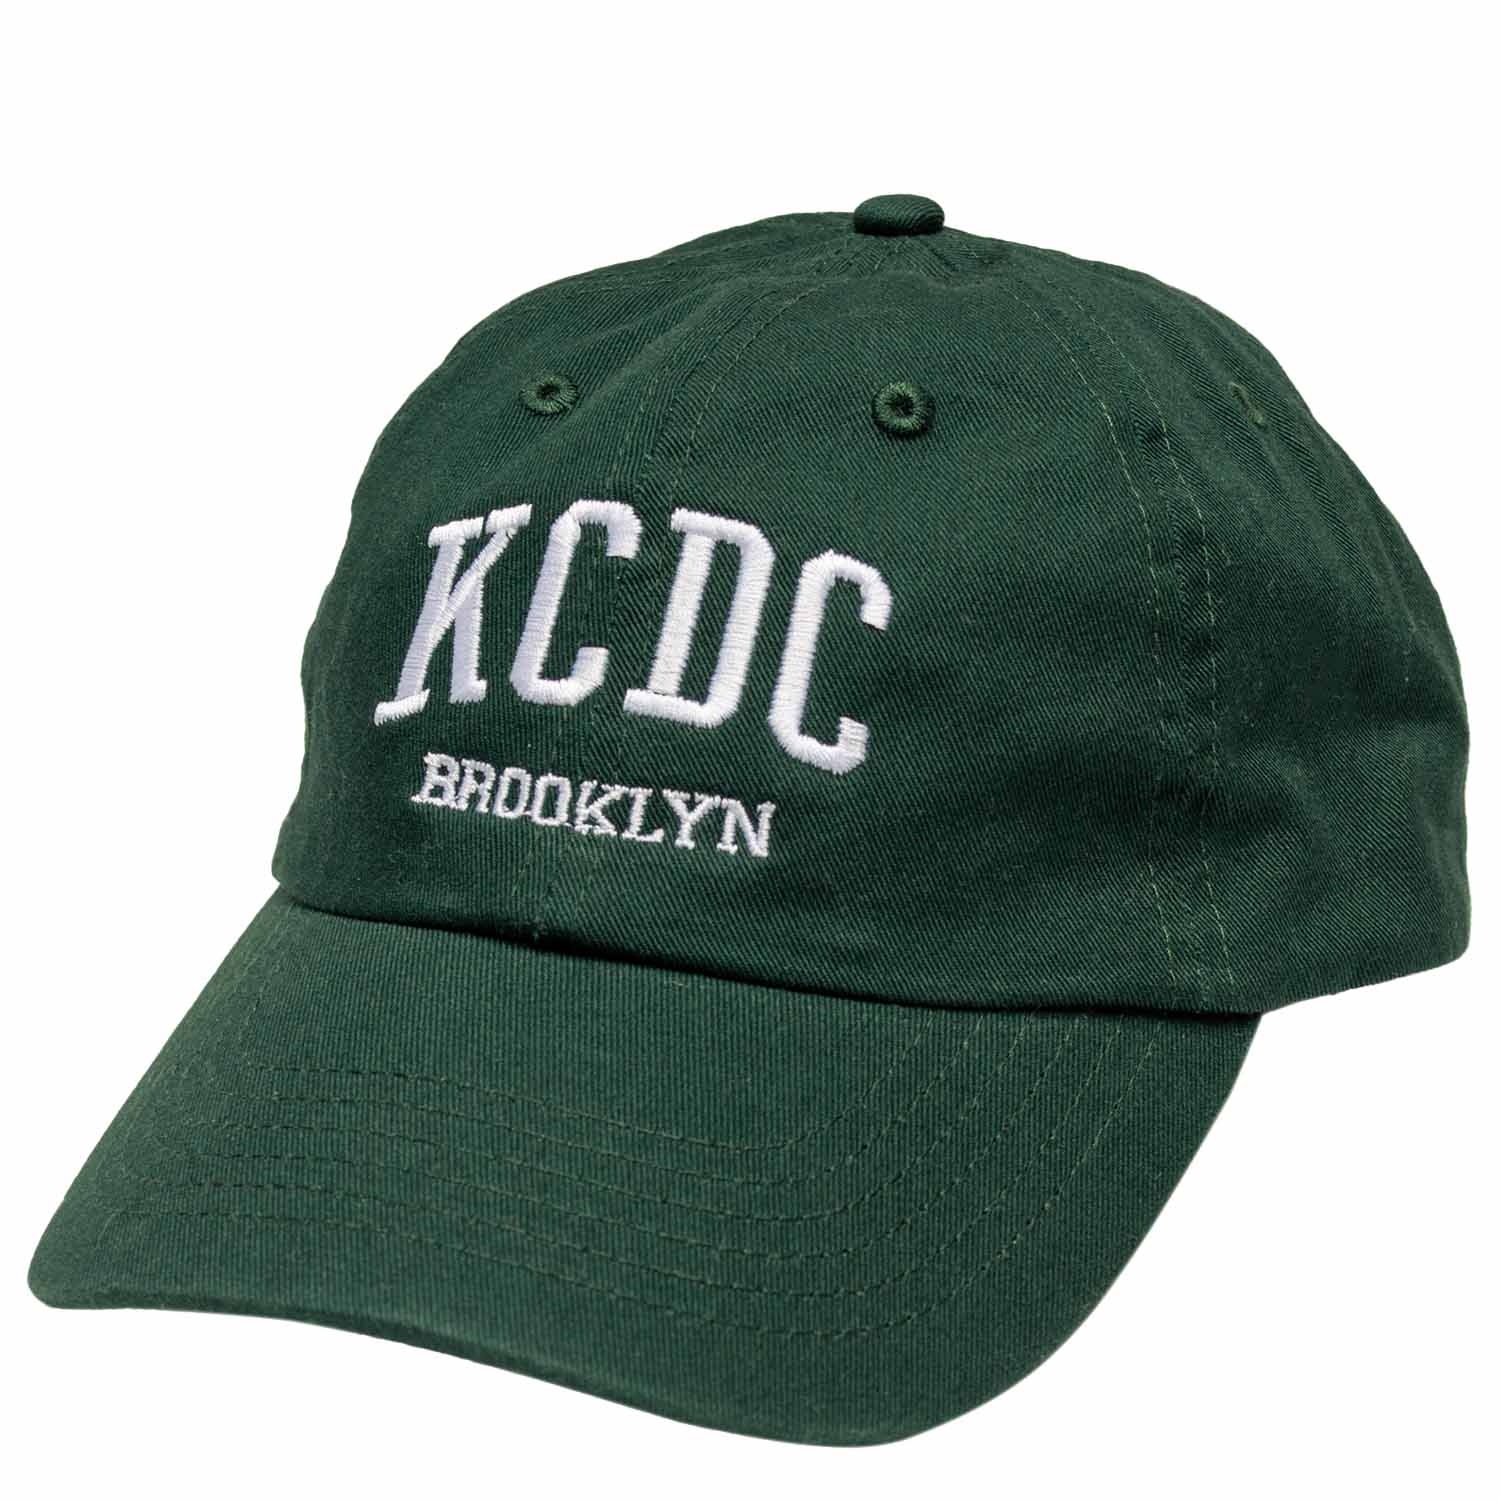 KCDC Varsity Bio-Washed Classic Dad Hat - Forest Green